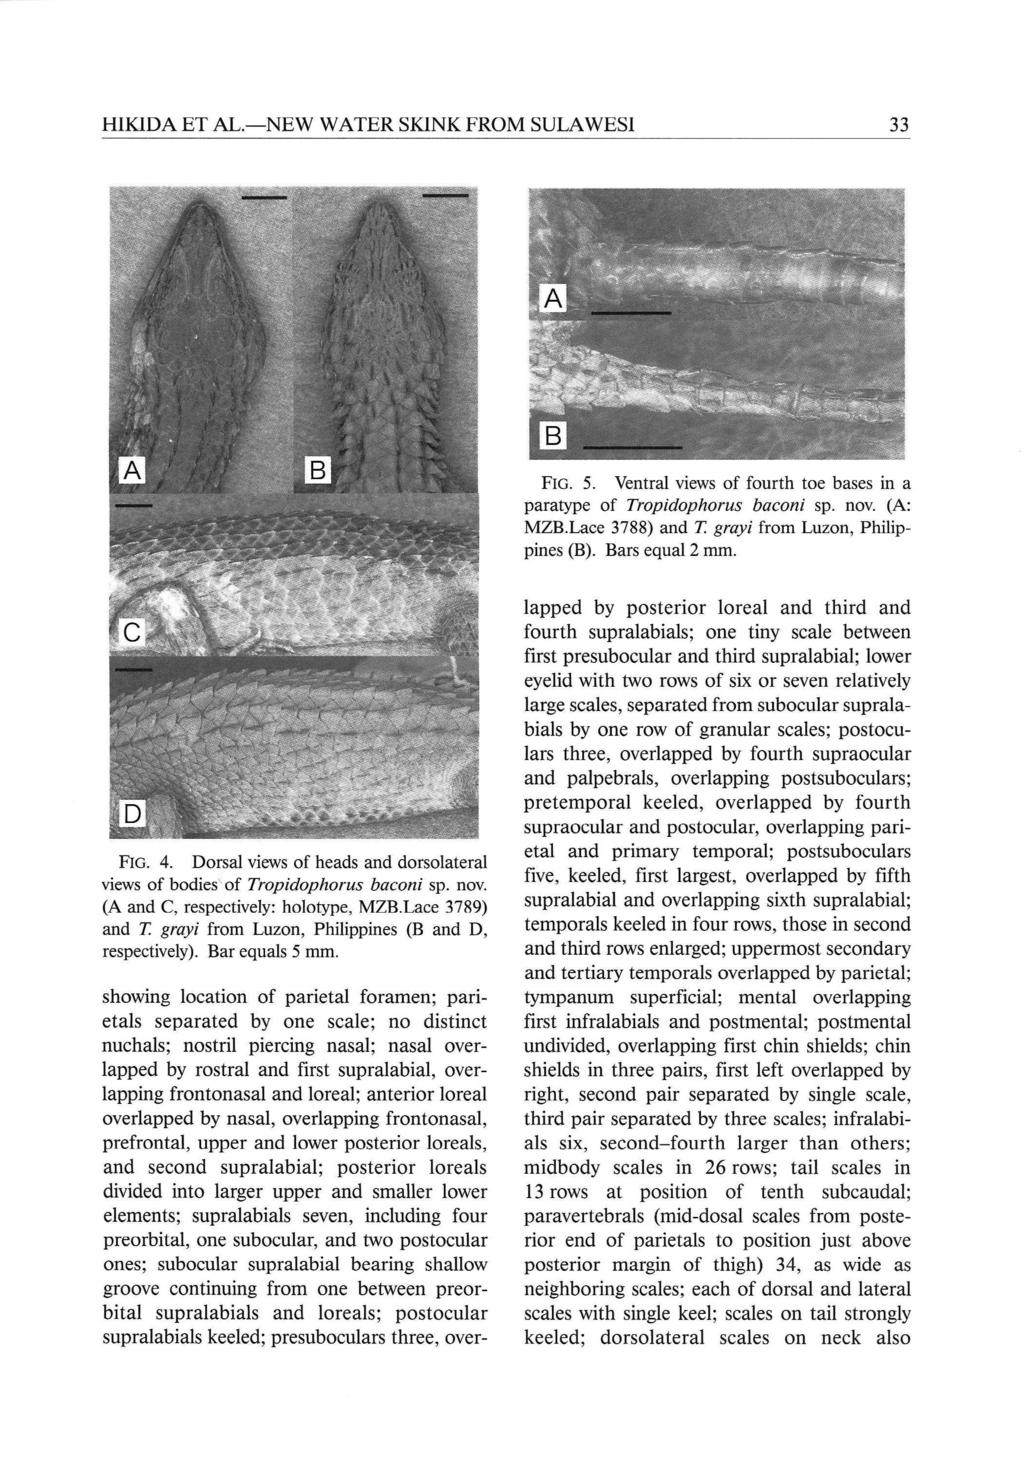 HIKIDA ET AL. -NEW WATER SKINK FROM 33 SULAWESI FIG. 5. Ventral views of fourth toe bases in a paratype of Tropidophorus baconi sp. nov. (A: MZB. Lace 3788) and T. grayi from Luzon, Philippines (B).